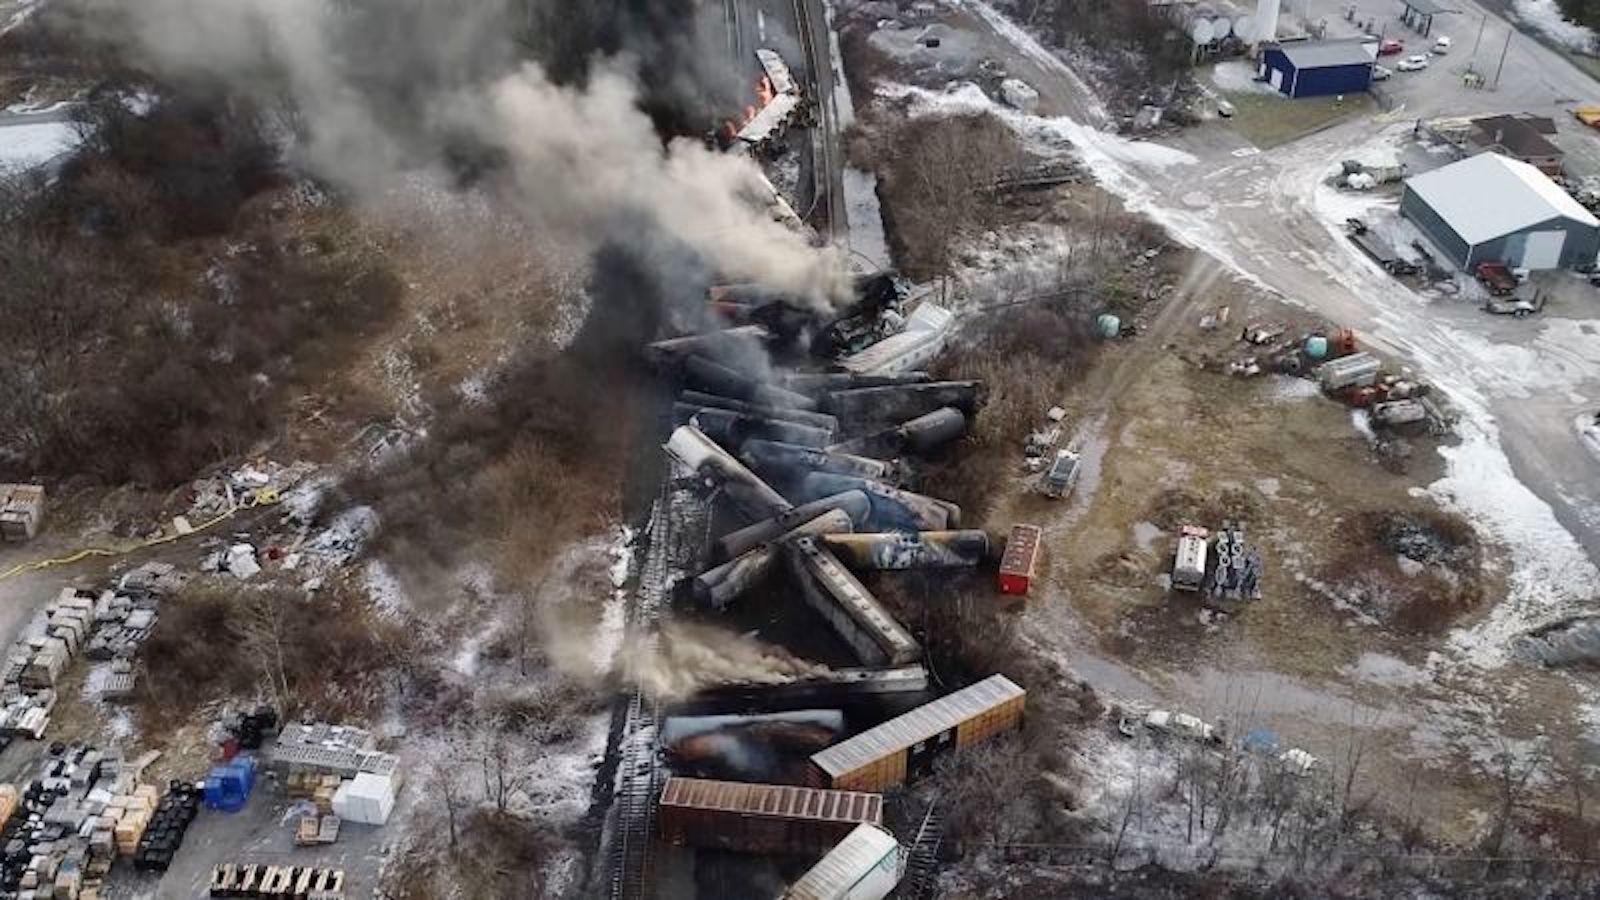 Summary of the spill of toxic substances in Ohio after train derailment